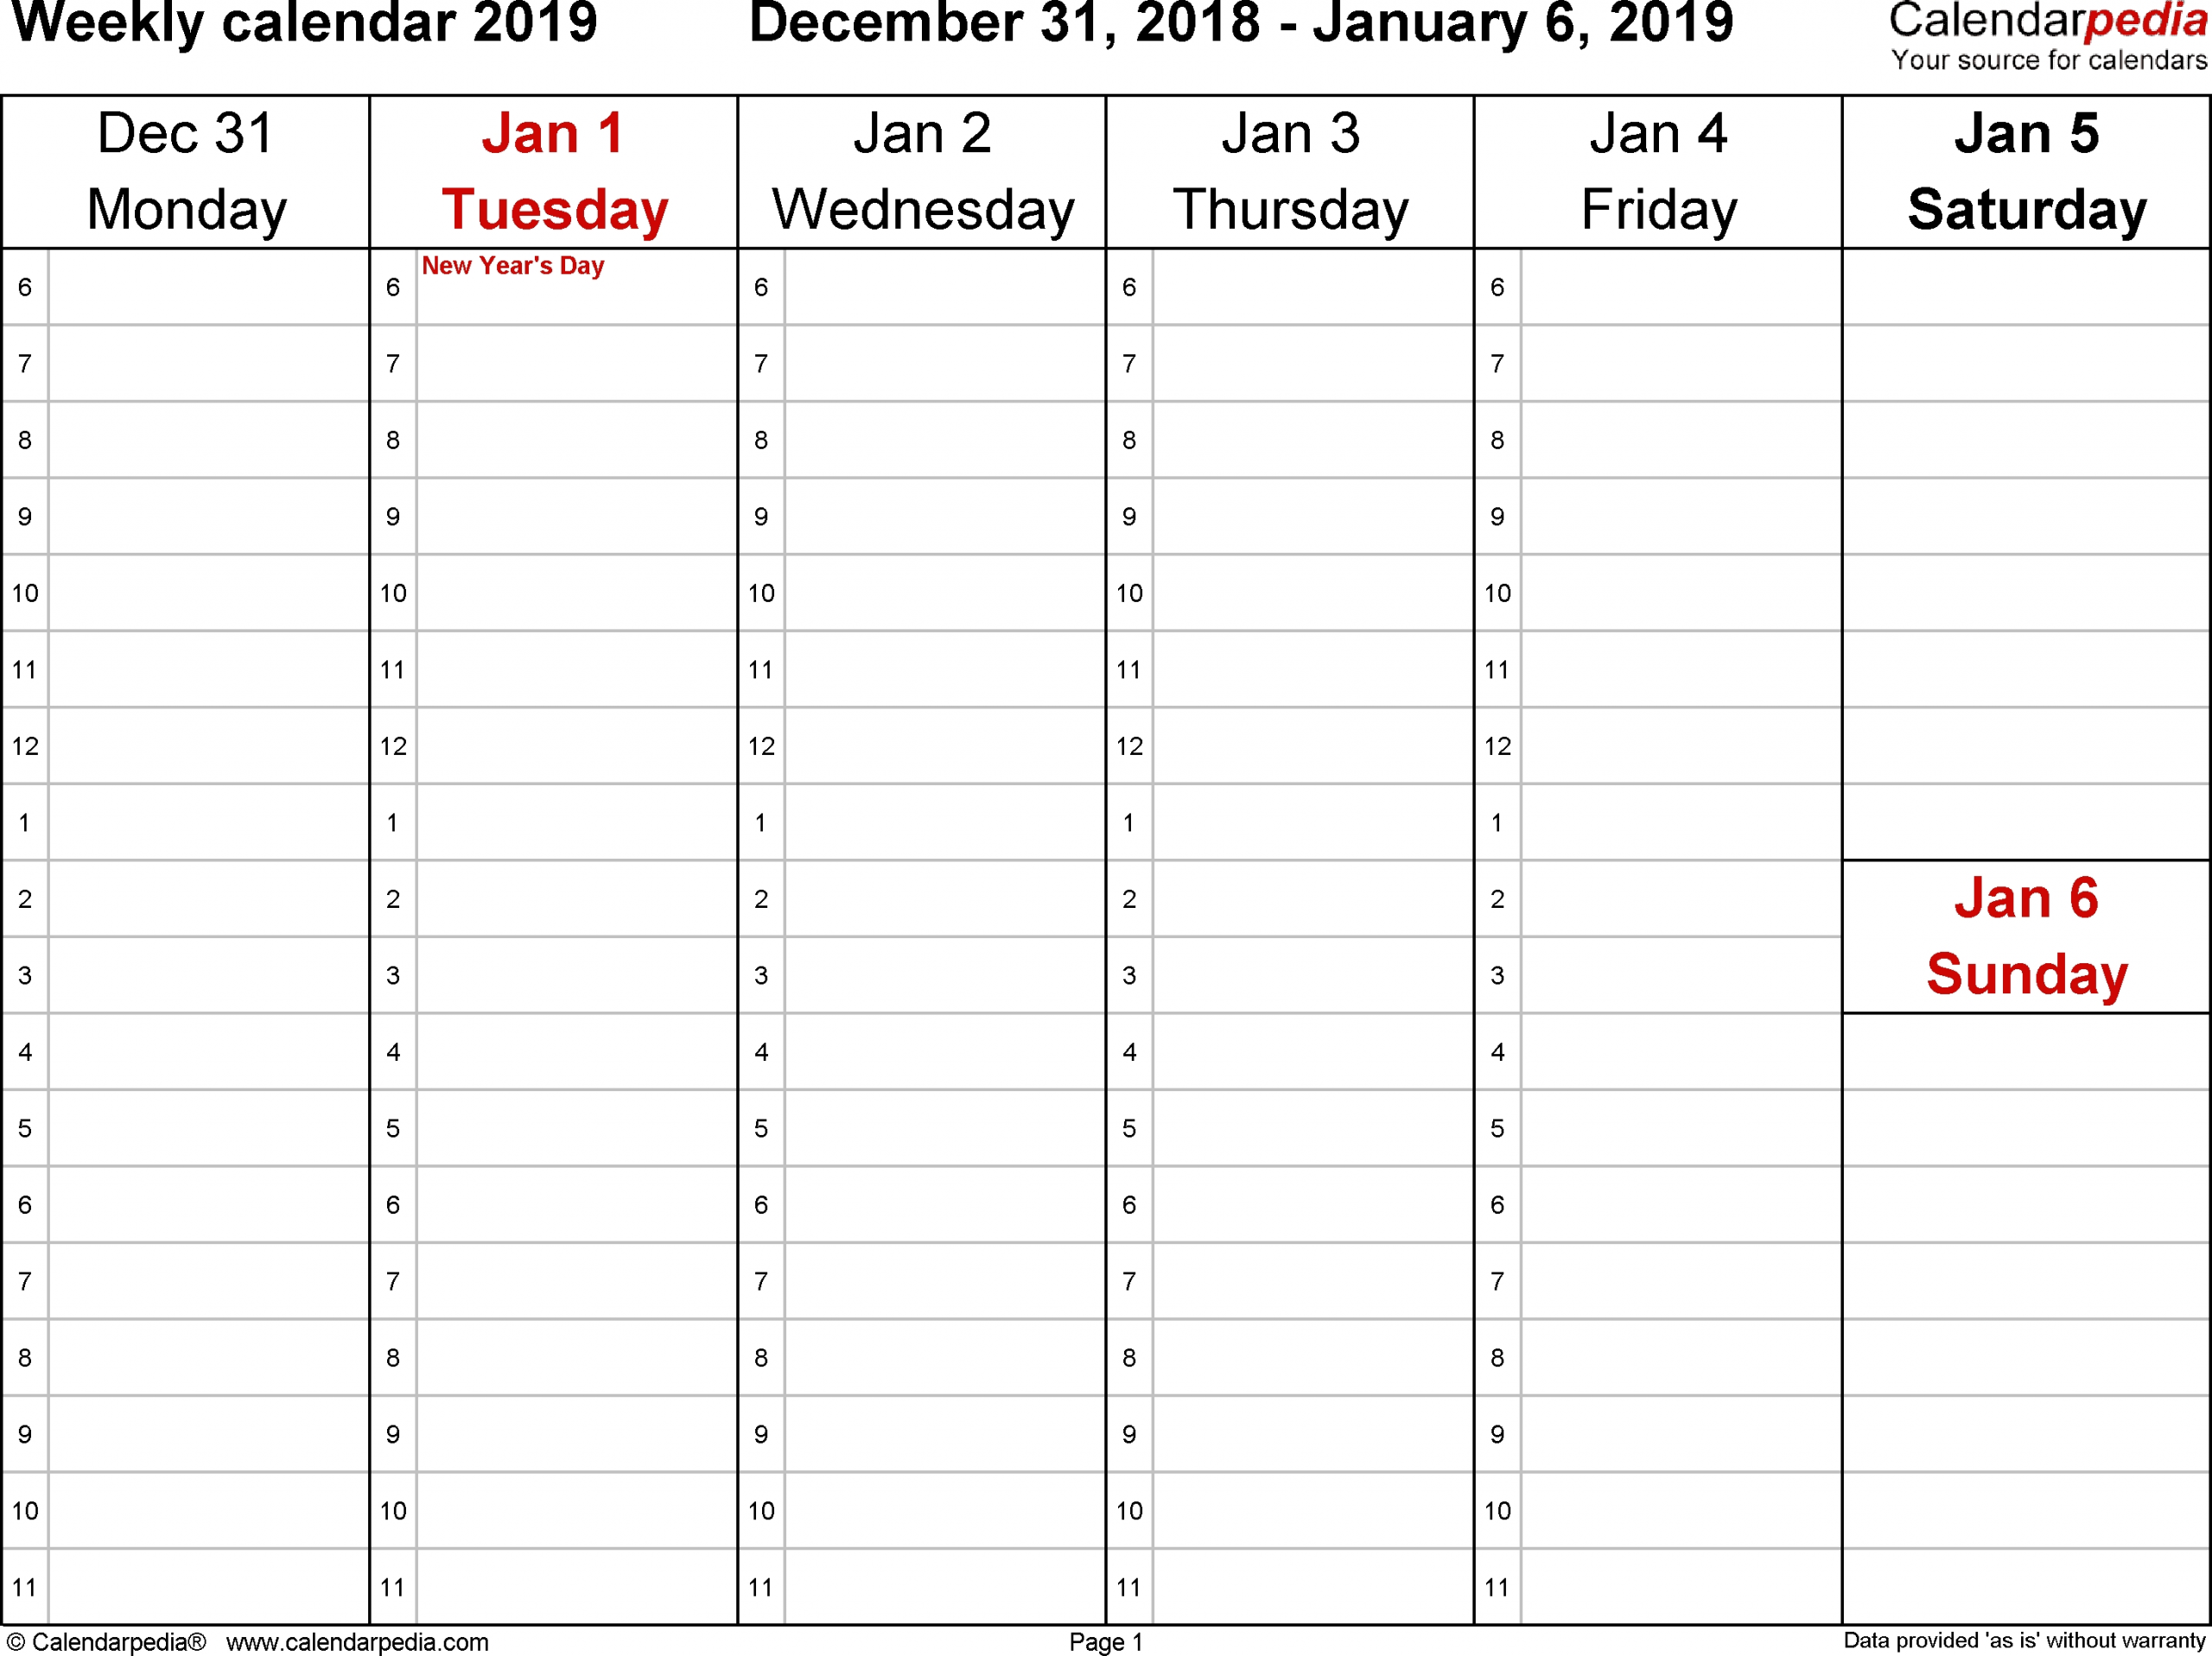 Weekly Calendars 2019 For Word - 12 Free Printable Templates Perky Calendar Showing Monday Through Friday